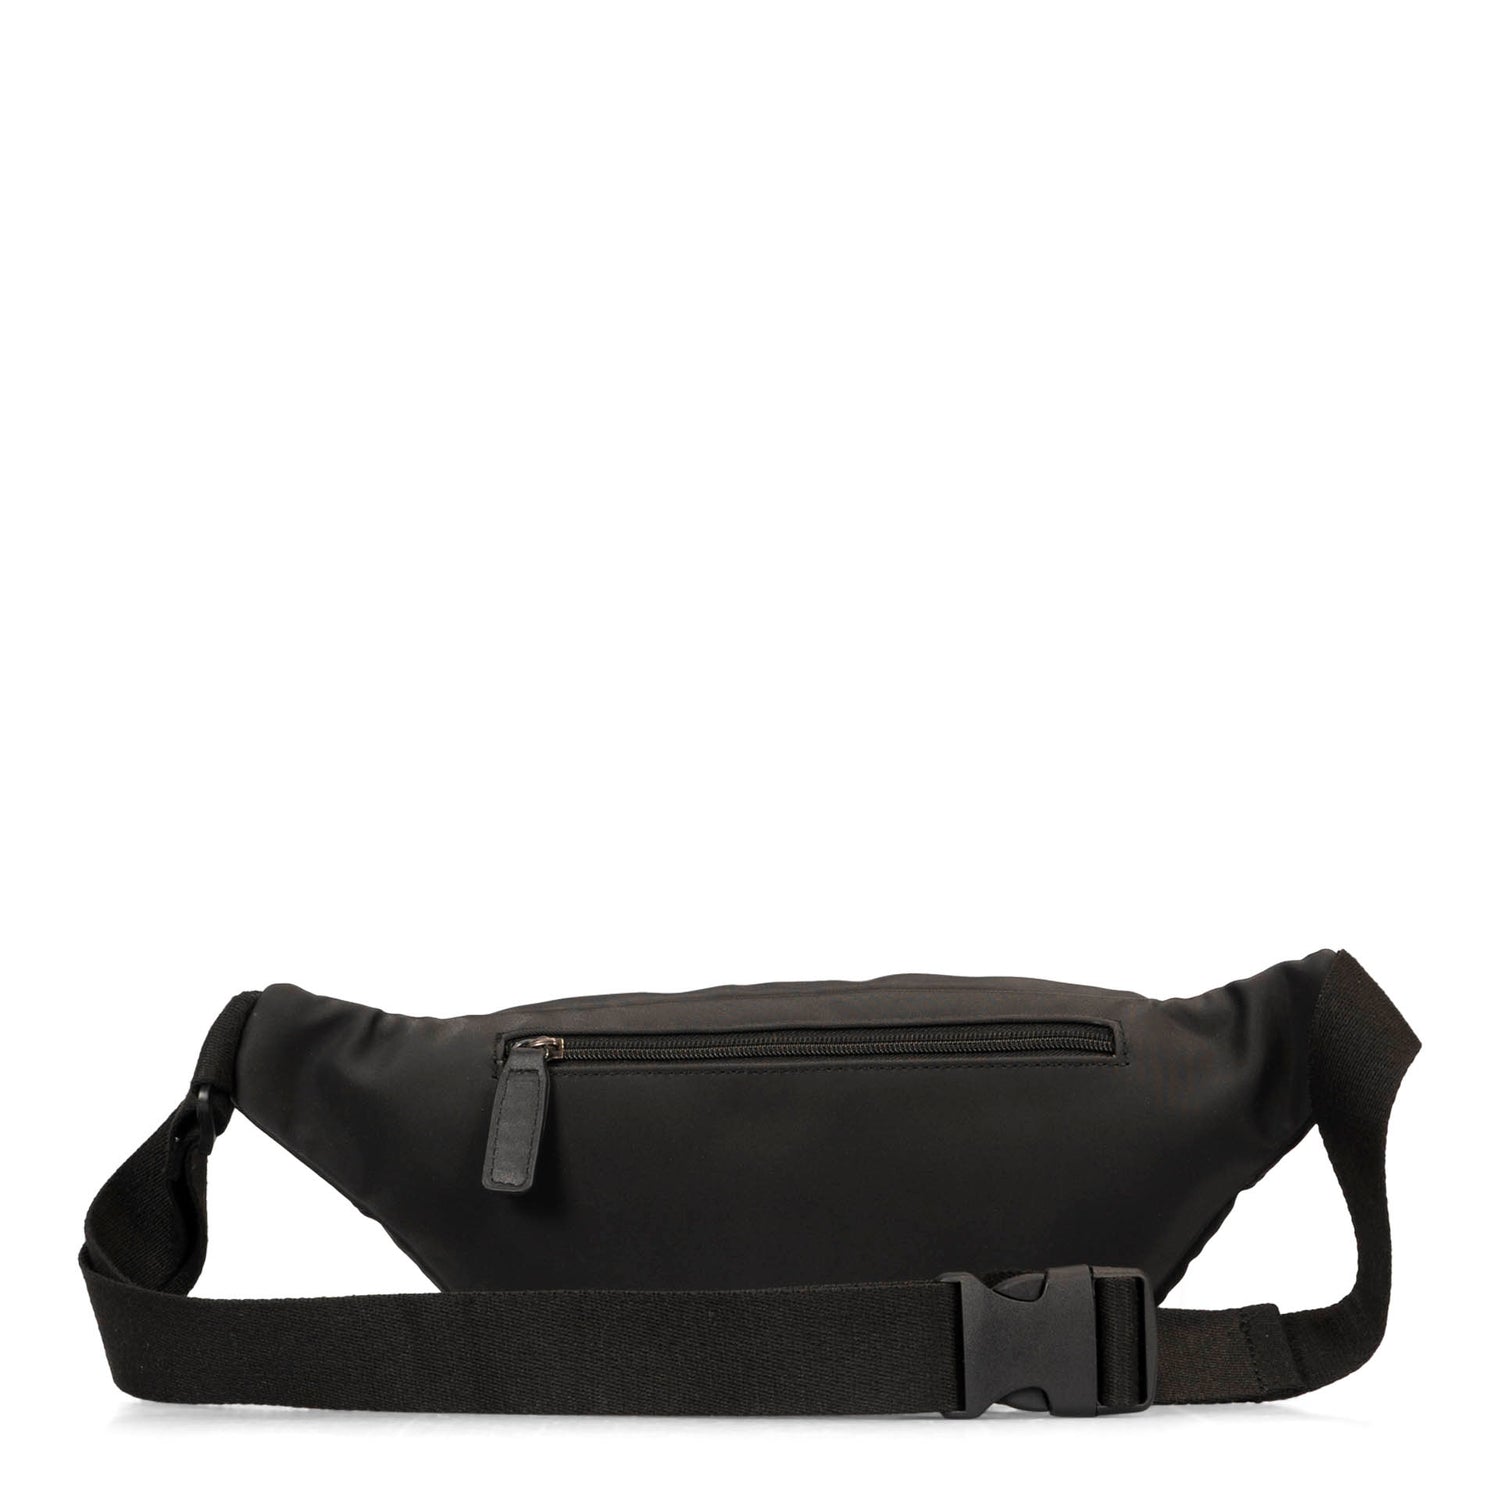 Backside view of a black fanny pack called Dilan designed by Roots showing its two tone PU-nylon texture, a belt strap, and hidden back zipper pocket.